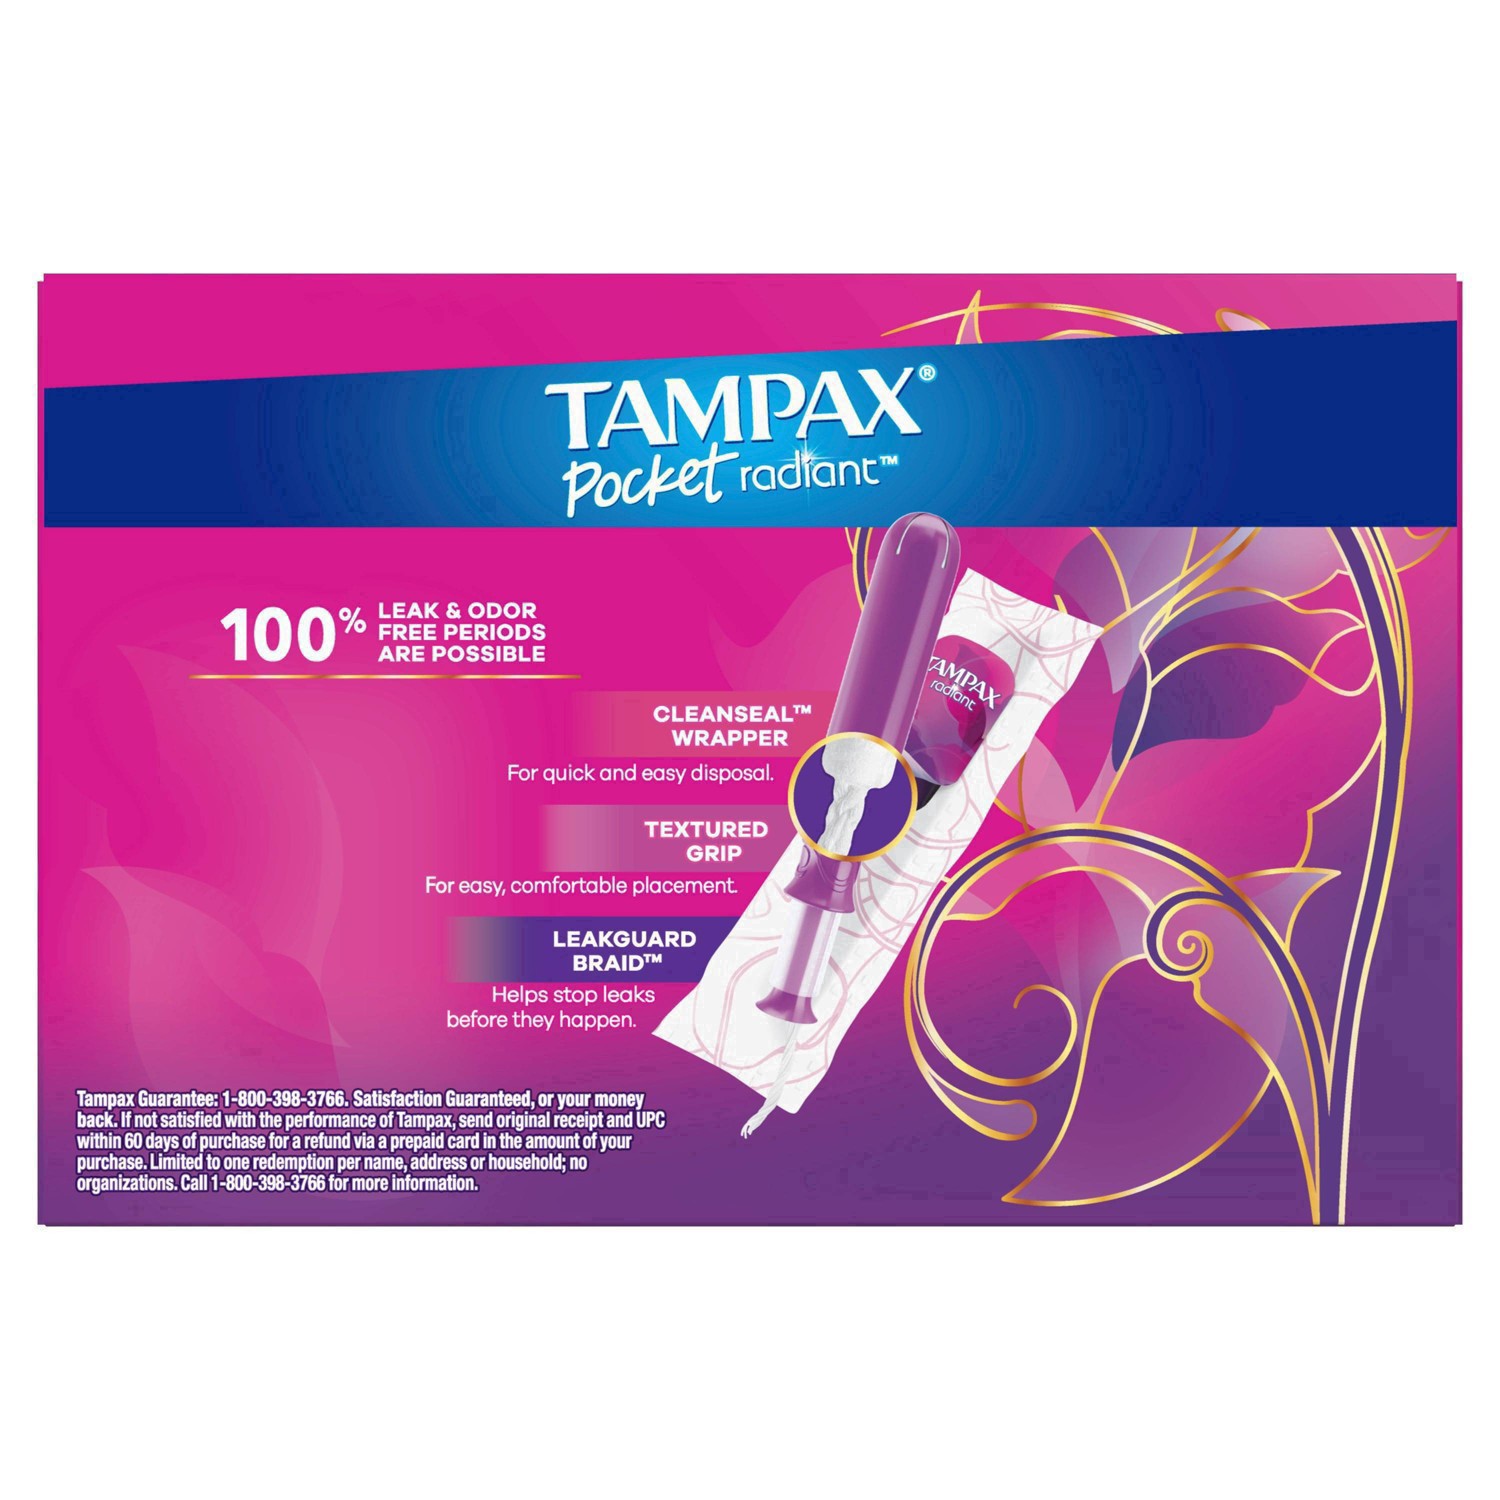 slide 92 of 94, Tampax Pocket Radiant Compact Plastic Tampons, With LeakGuard Braid, Super Absorbency, Unscented, 28 Count, 28 ct